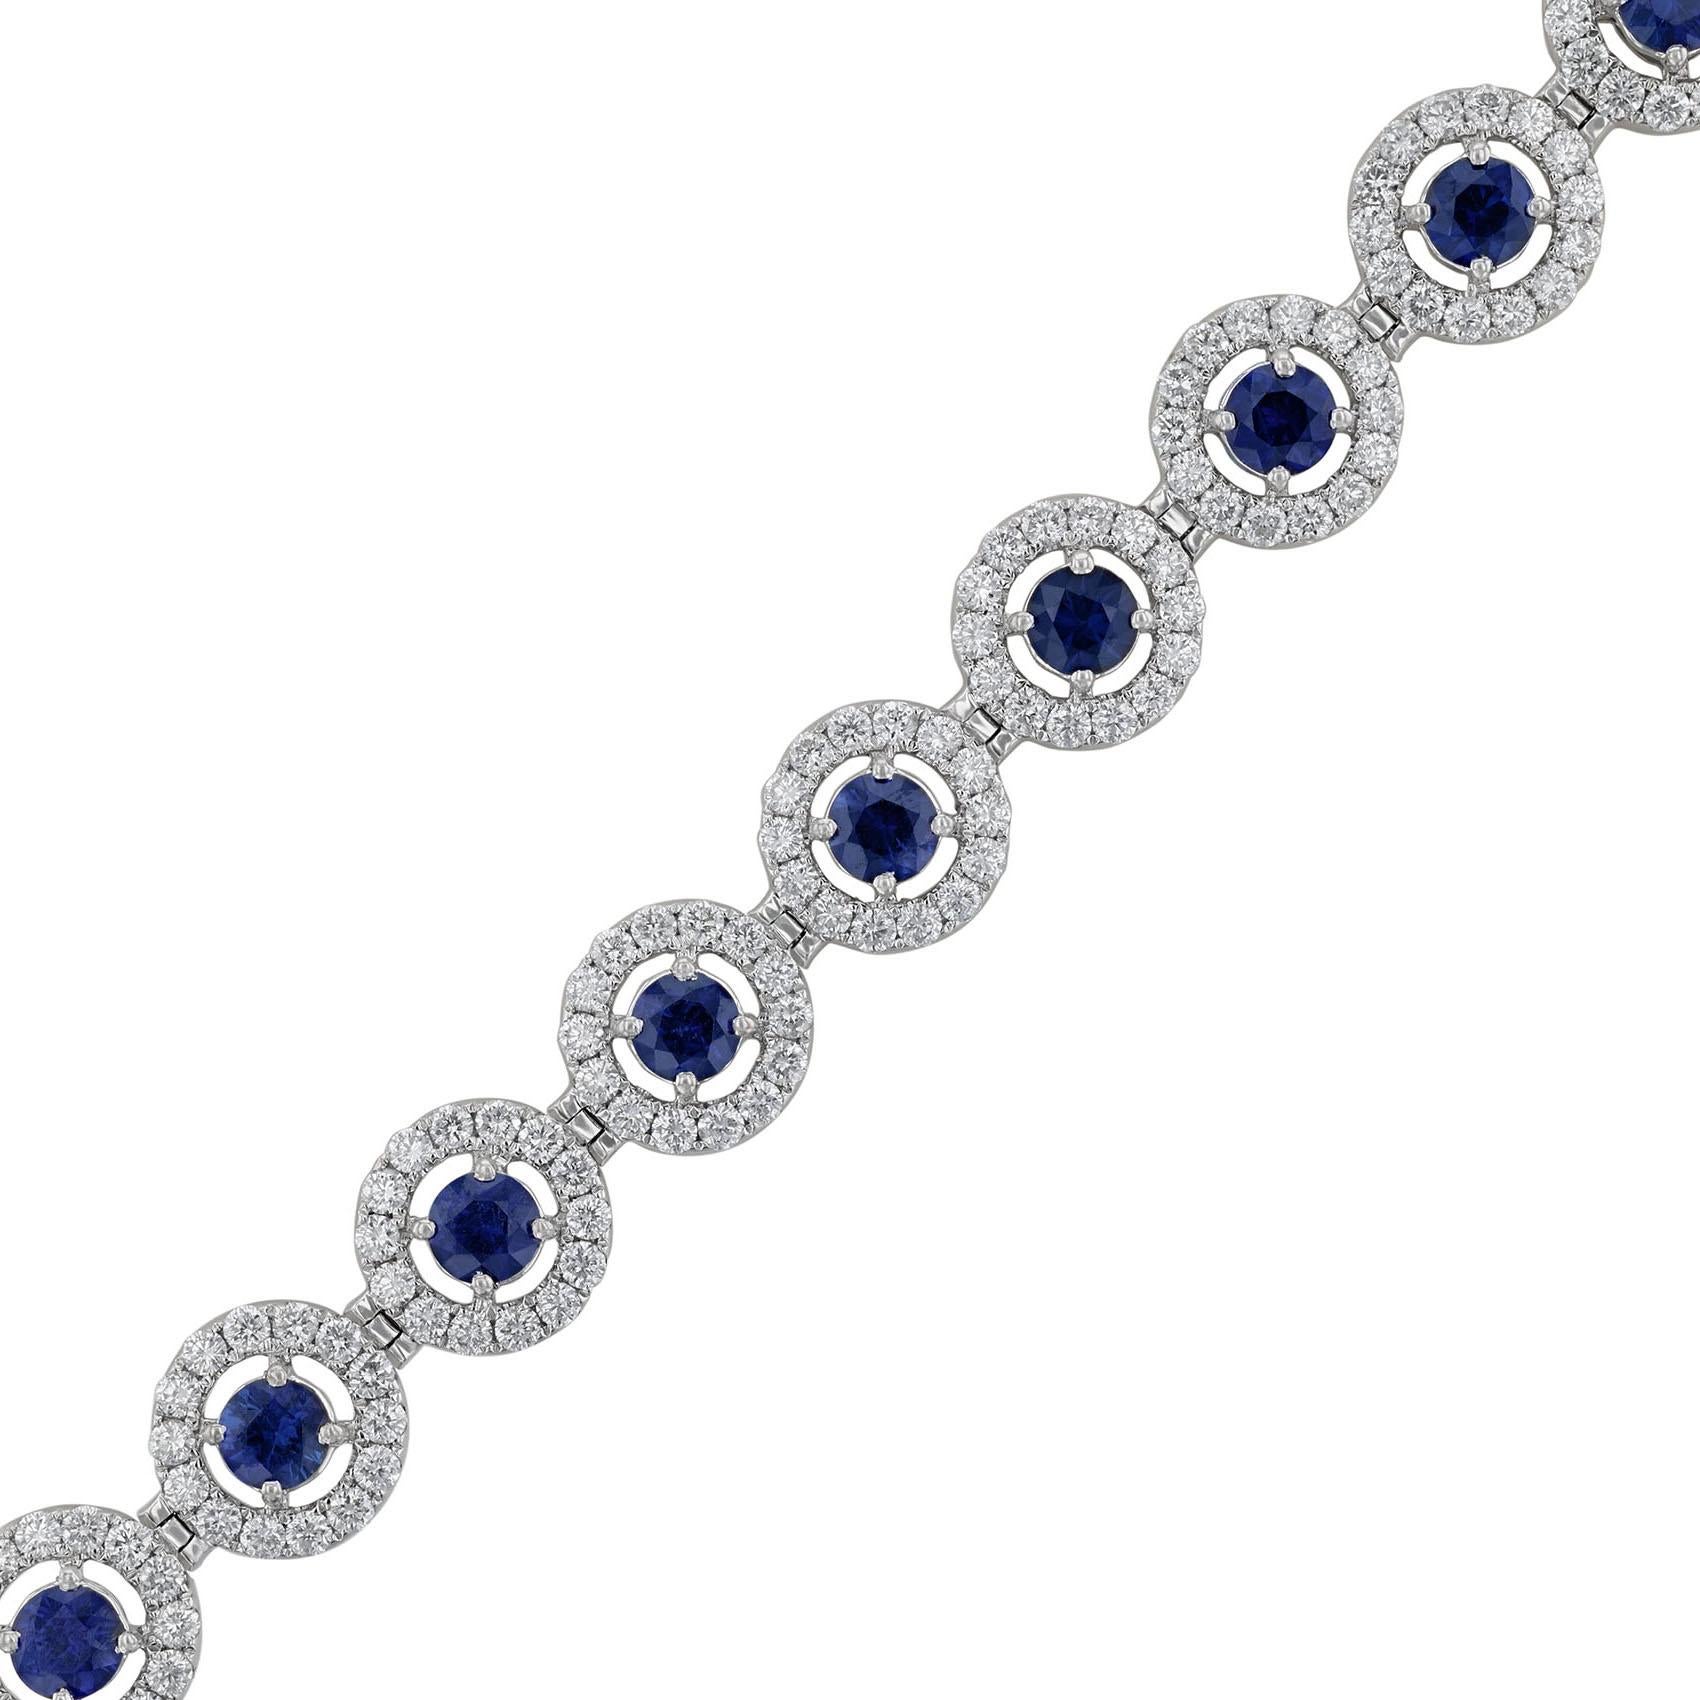 This bracelet is made in 18K white gold. It features 19 round cut blue sapphires weighing 4.68 carats. Surrounded by 266 round cut diamonds weighing 3.87 carats. All stones are prong set. The ring has a color grade (H) and a clarity grade (SI2).

